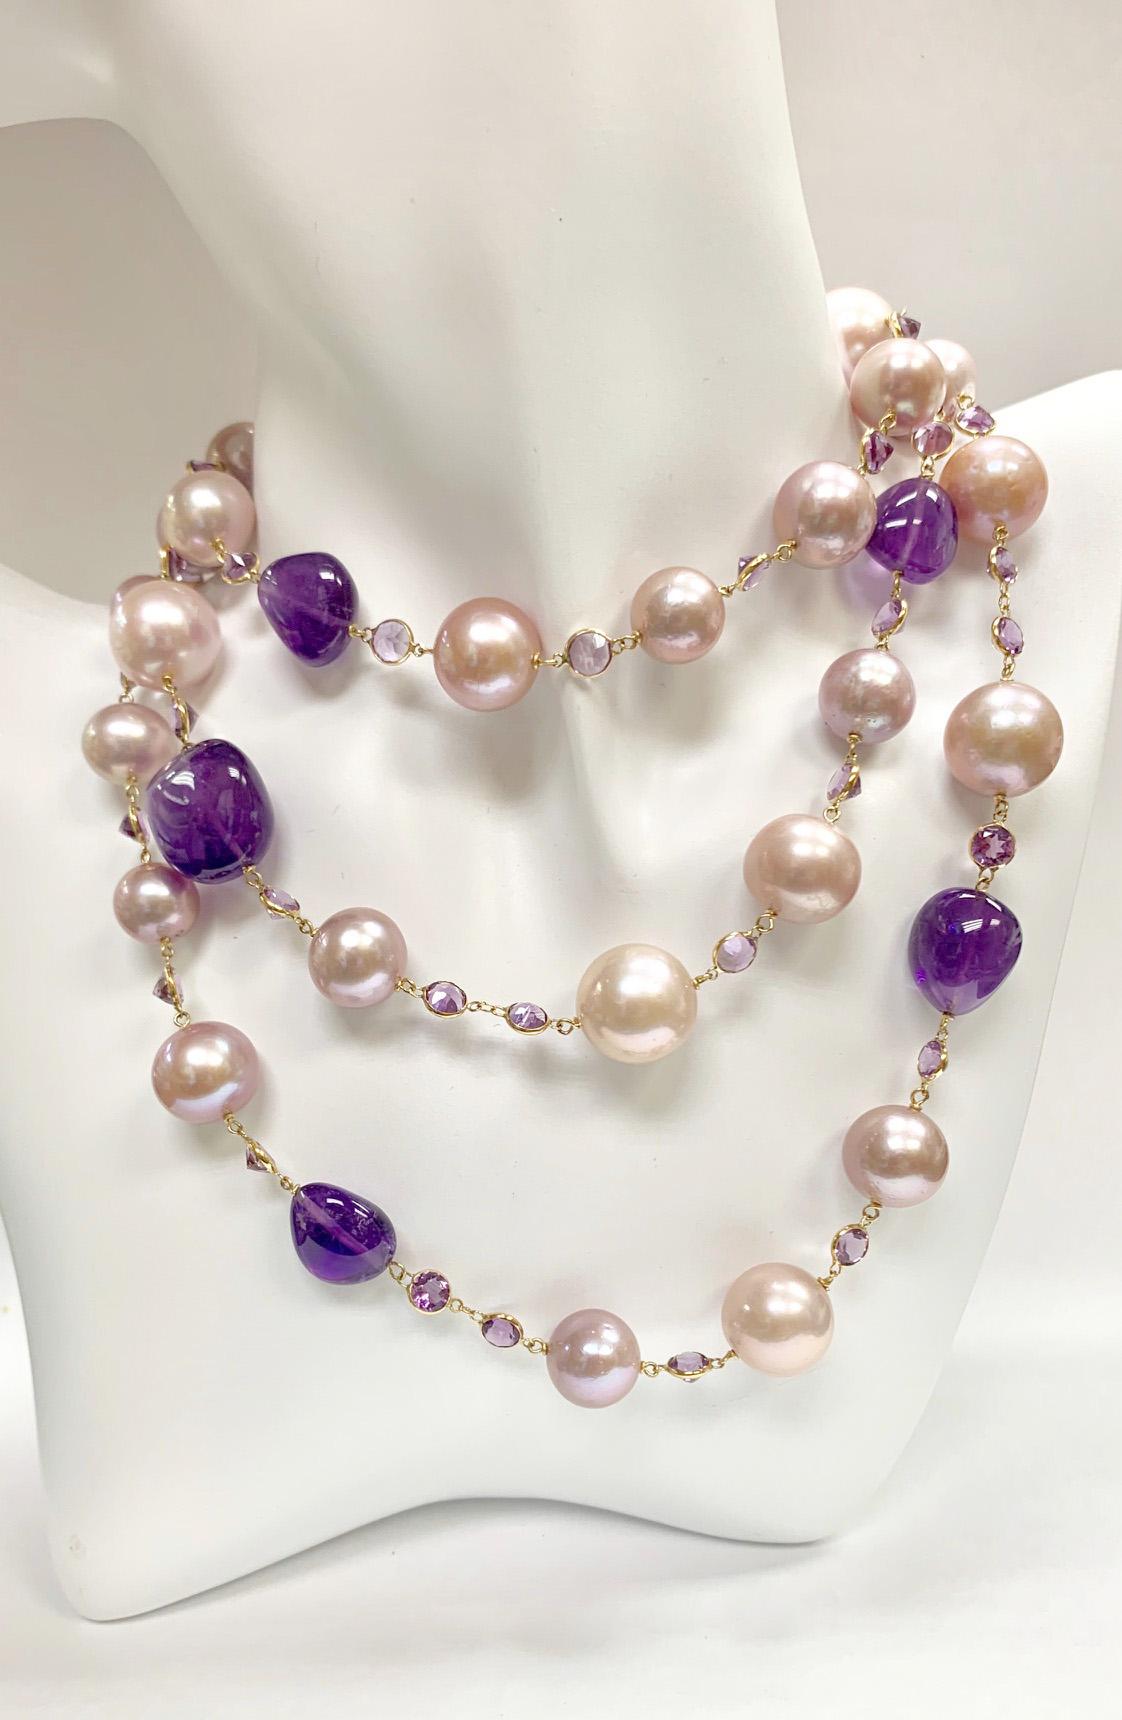 Tahitian Pearl Rope Necklace
Length: 42 inches
Pearls: 13-9mm Pink & Peach pearls
Stones: Amethysts
Gold: 18K Yellow Gold